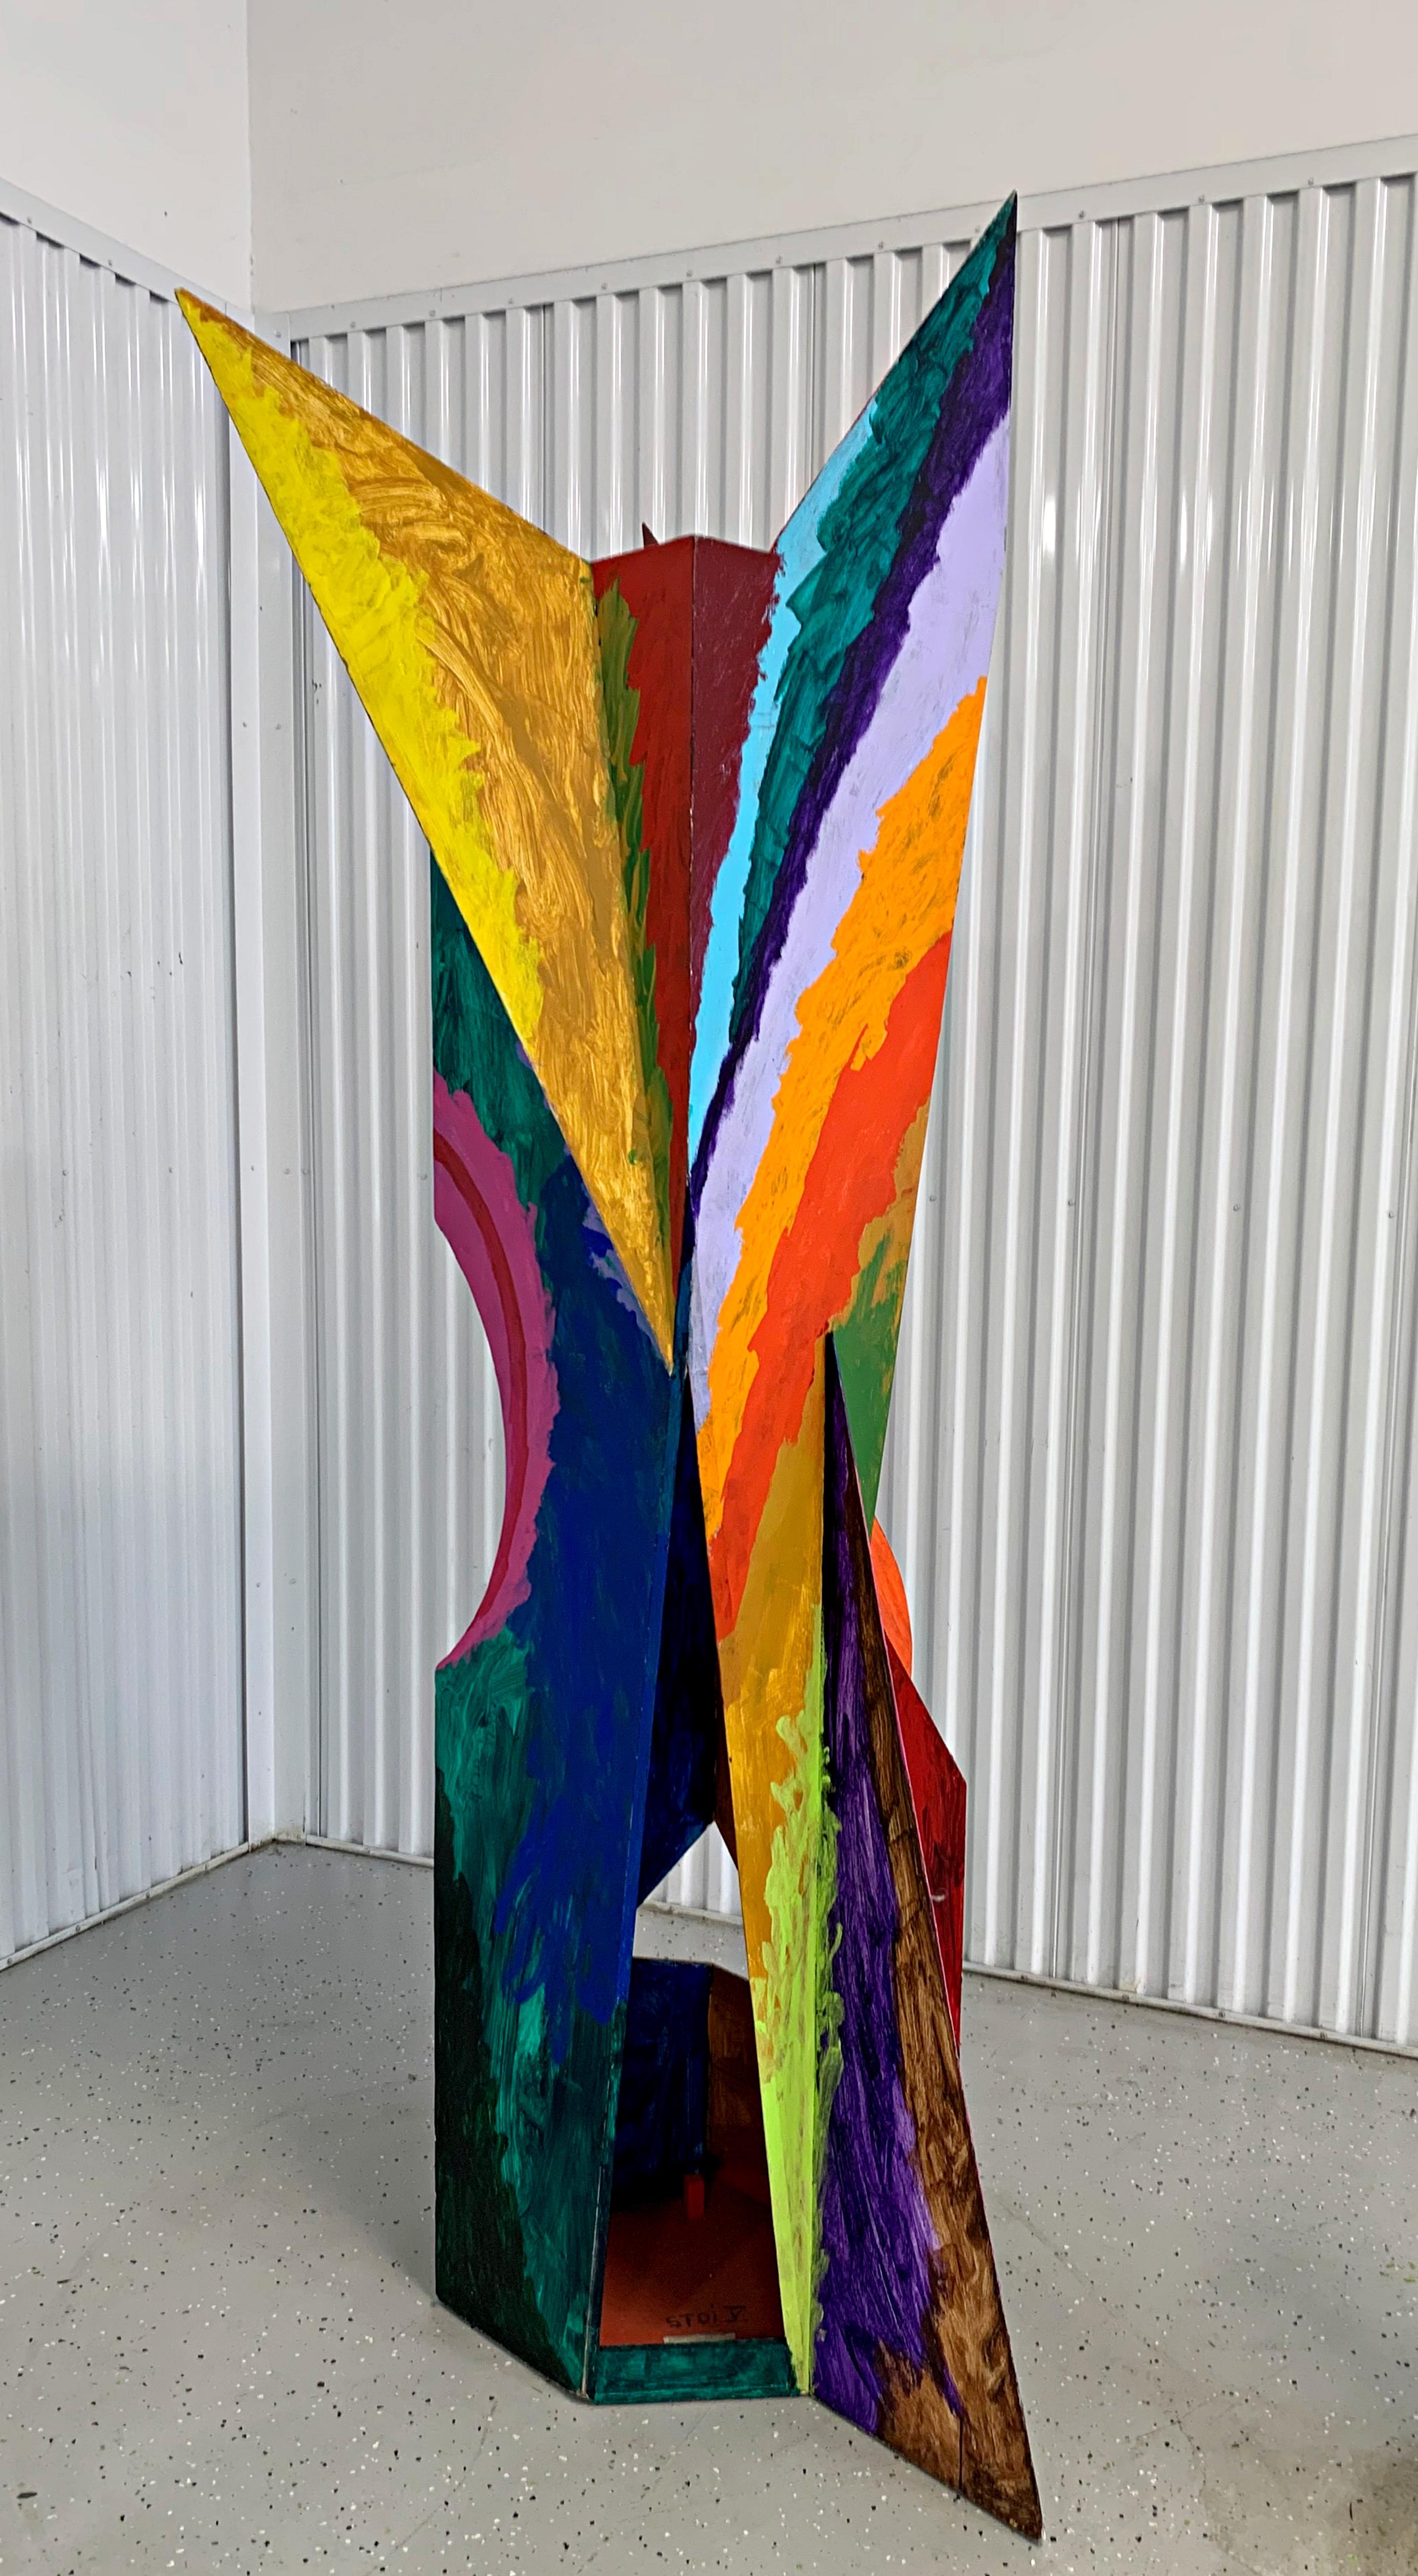 STOI V, unique dazzling large indoor painted wood sculpture by important artist  - Sculpture by Alexander Liberman